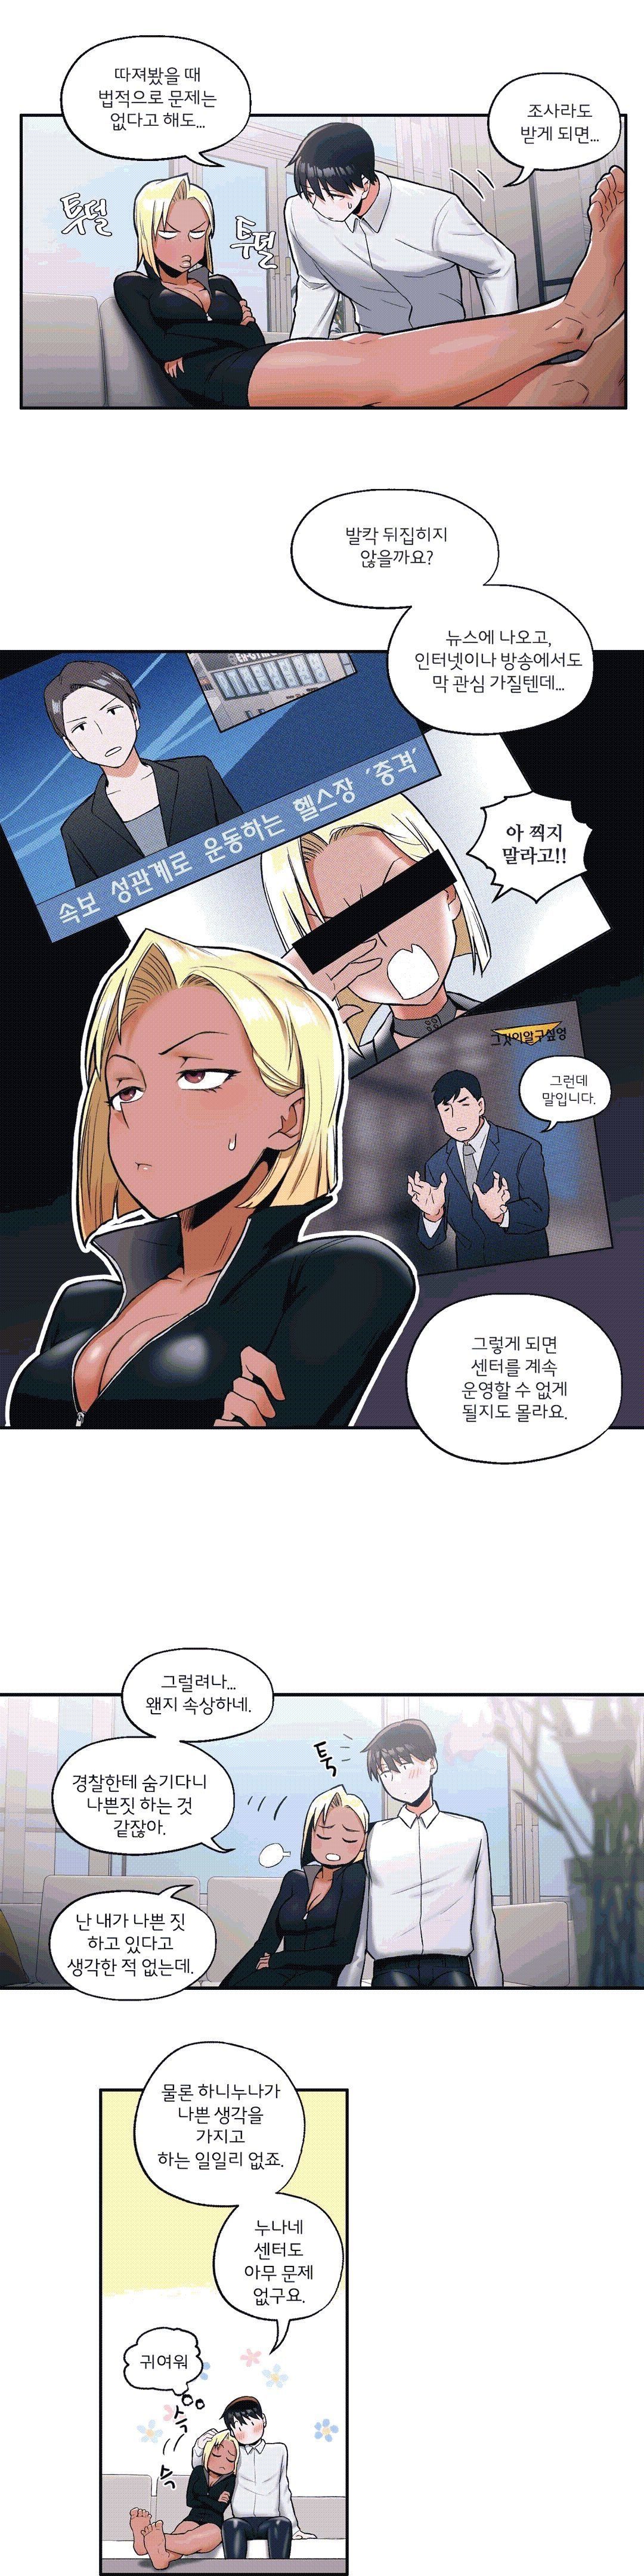 Sexercise Raw - Chapter 17 Page 13